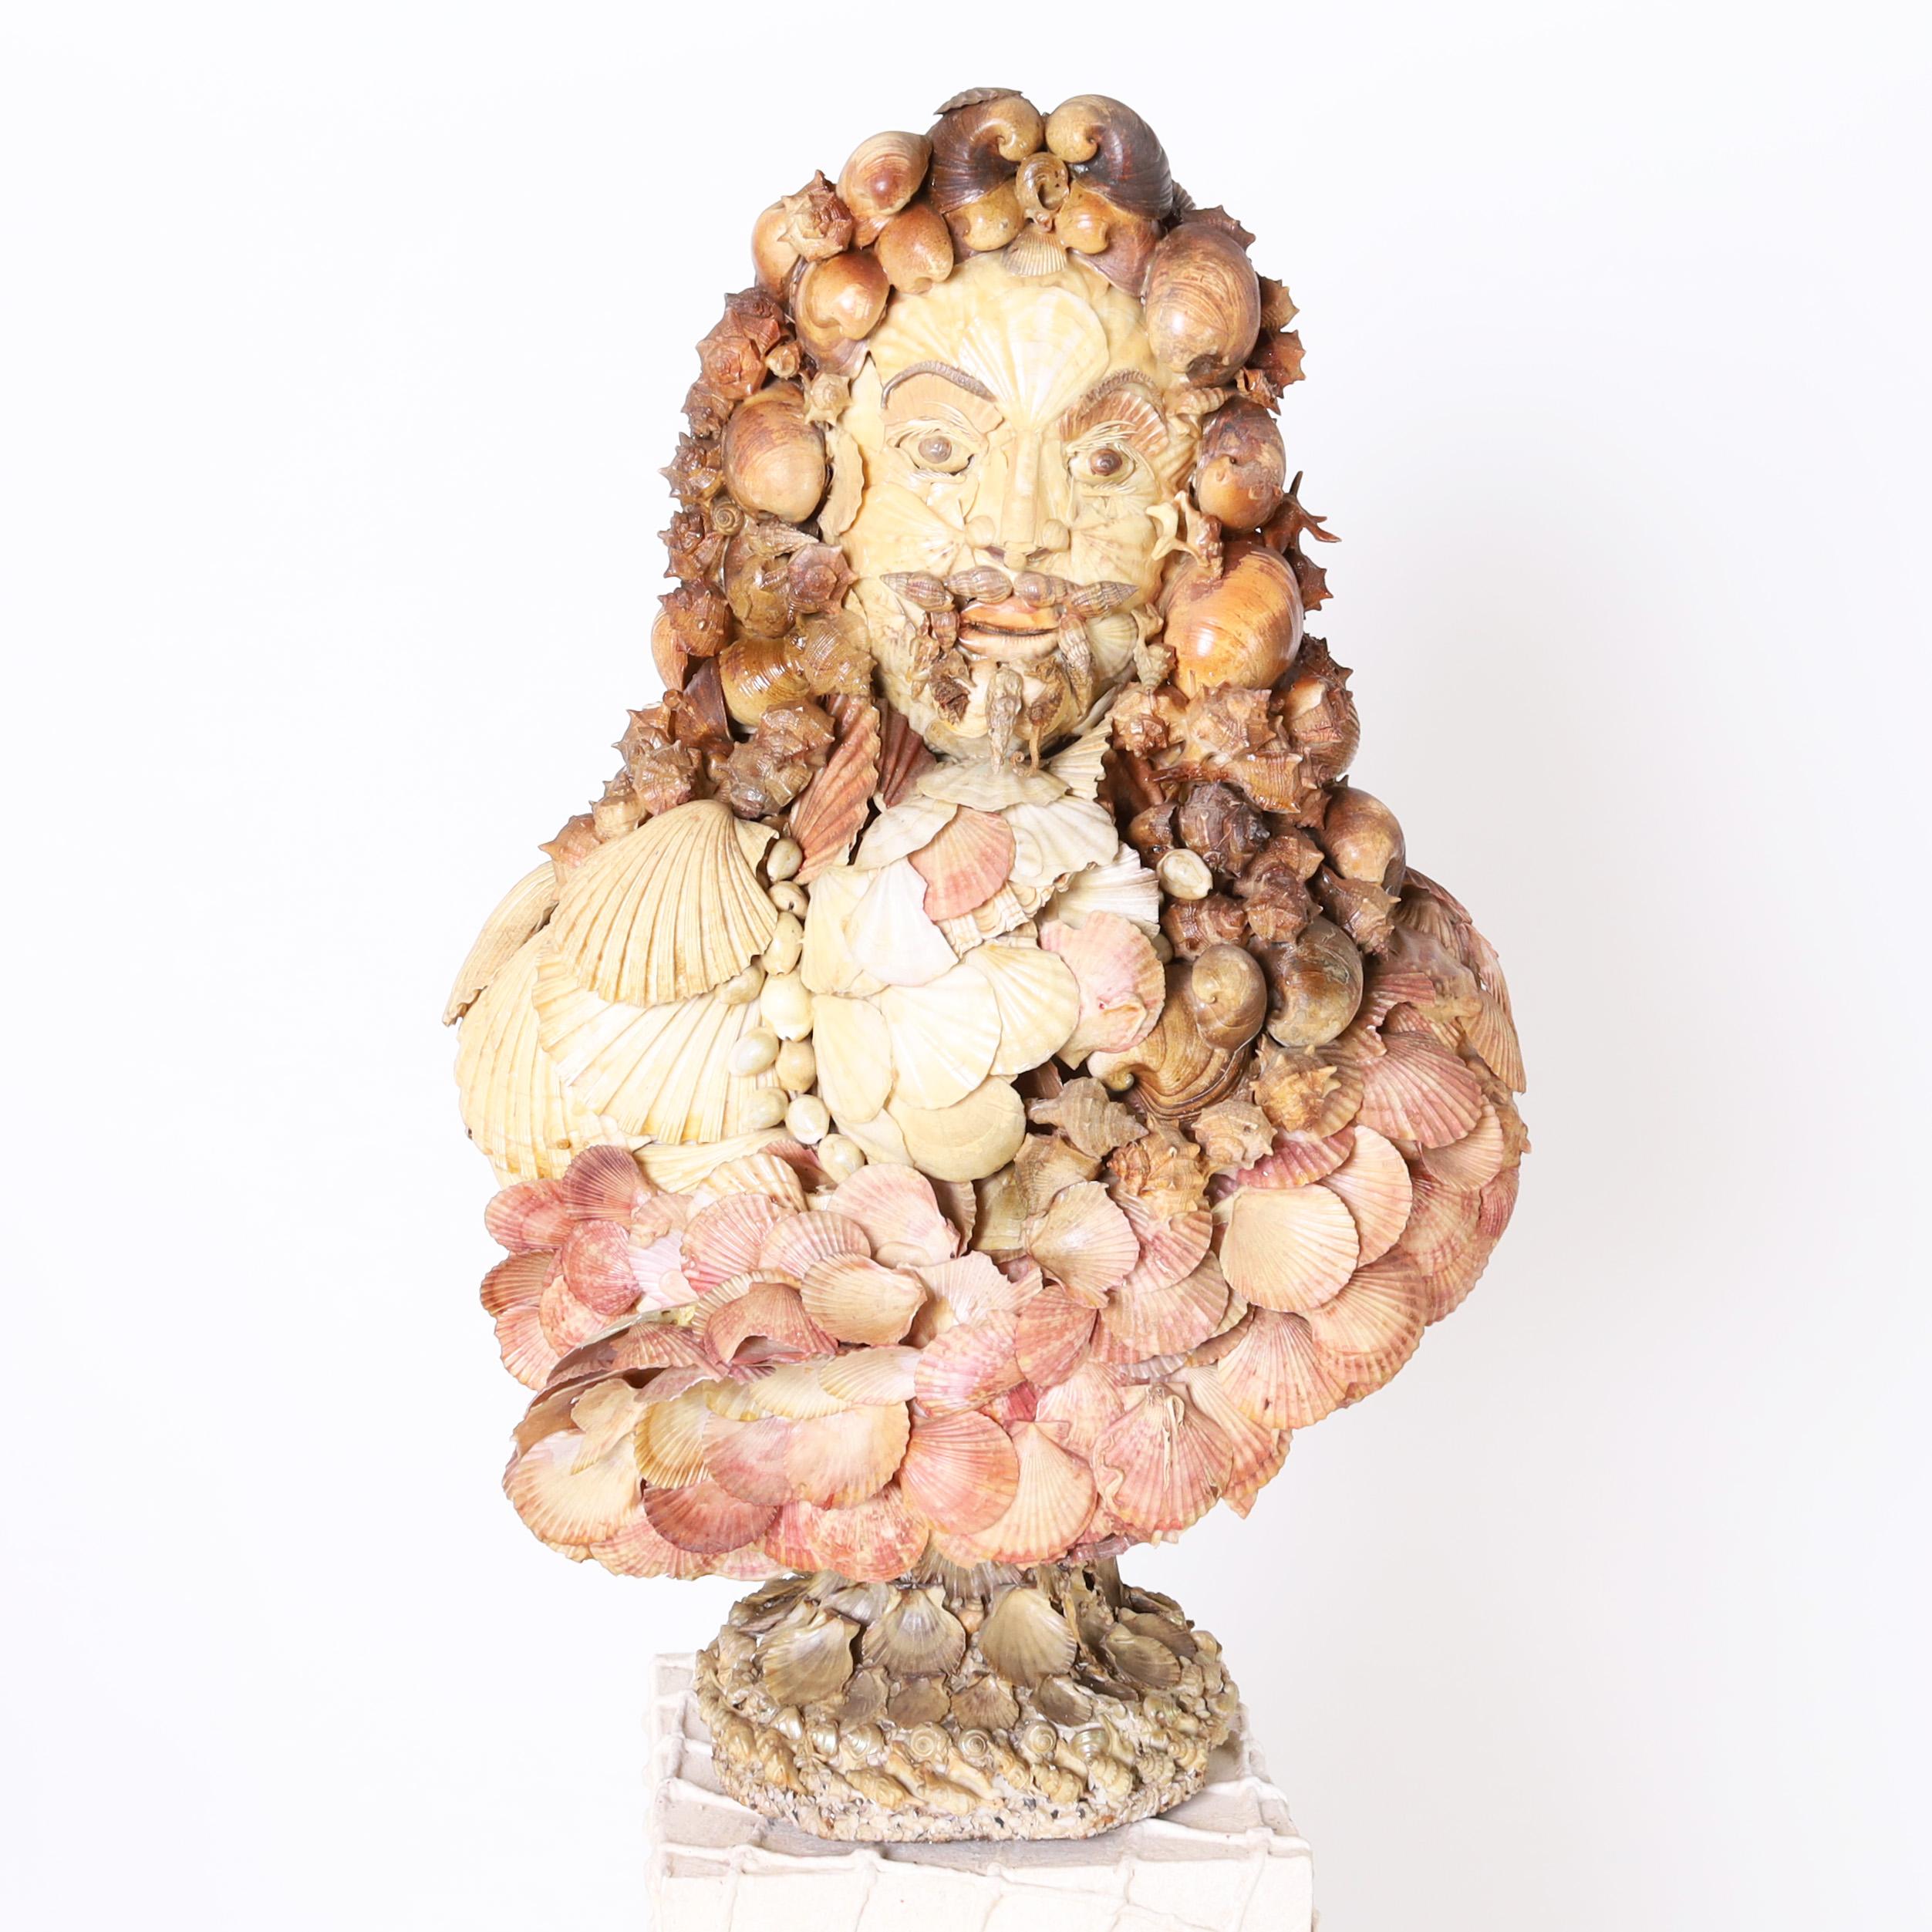 Whimsical Italian seashell encrusted bust with an eccentric composition depicting an 18th century dashing figure of a man complete with mustache and goatee. Presented on a custom wood and composition pedestal decorated with a fishing net.

Pedestal: